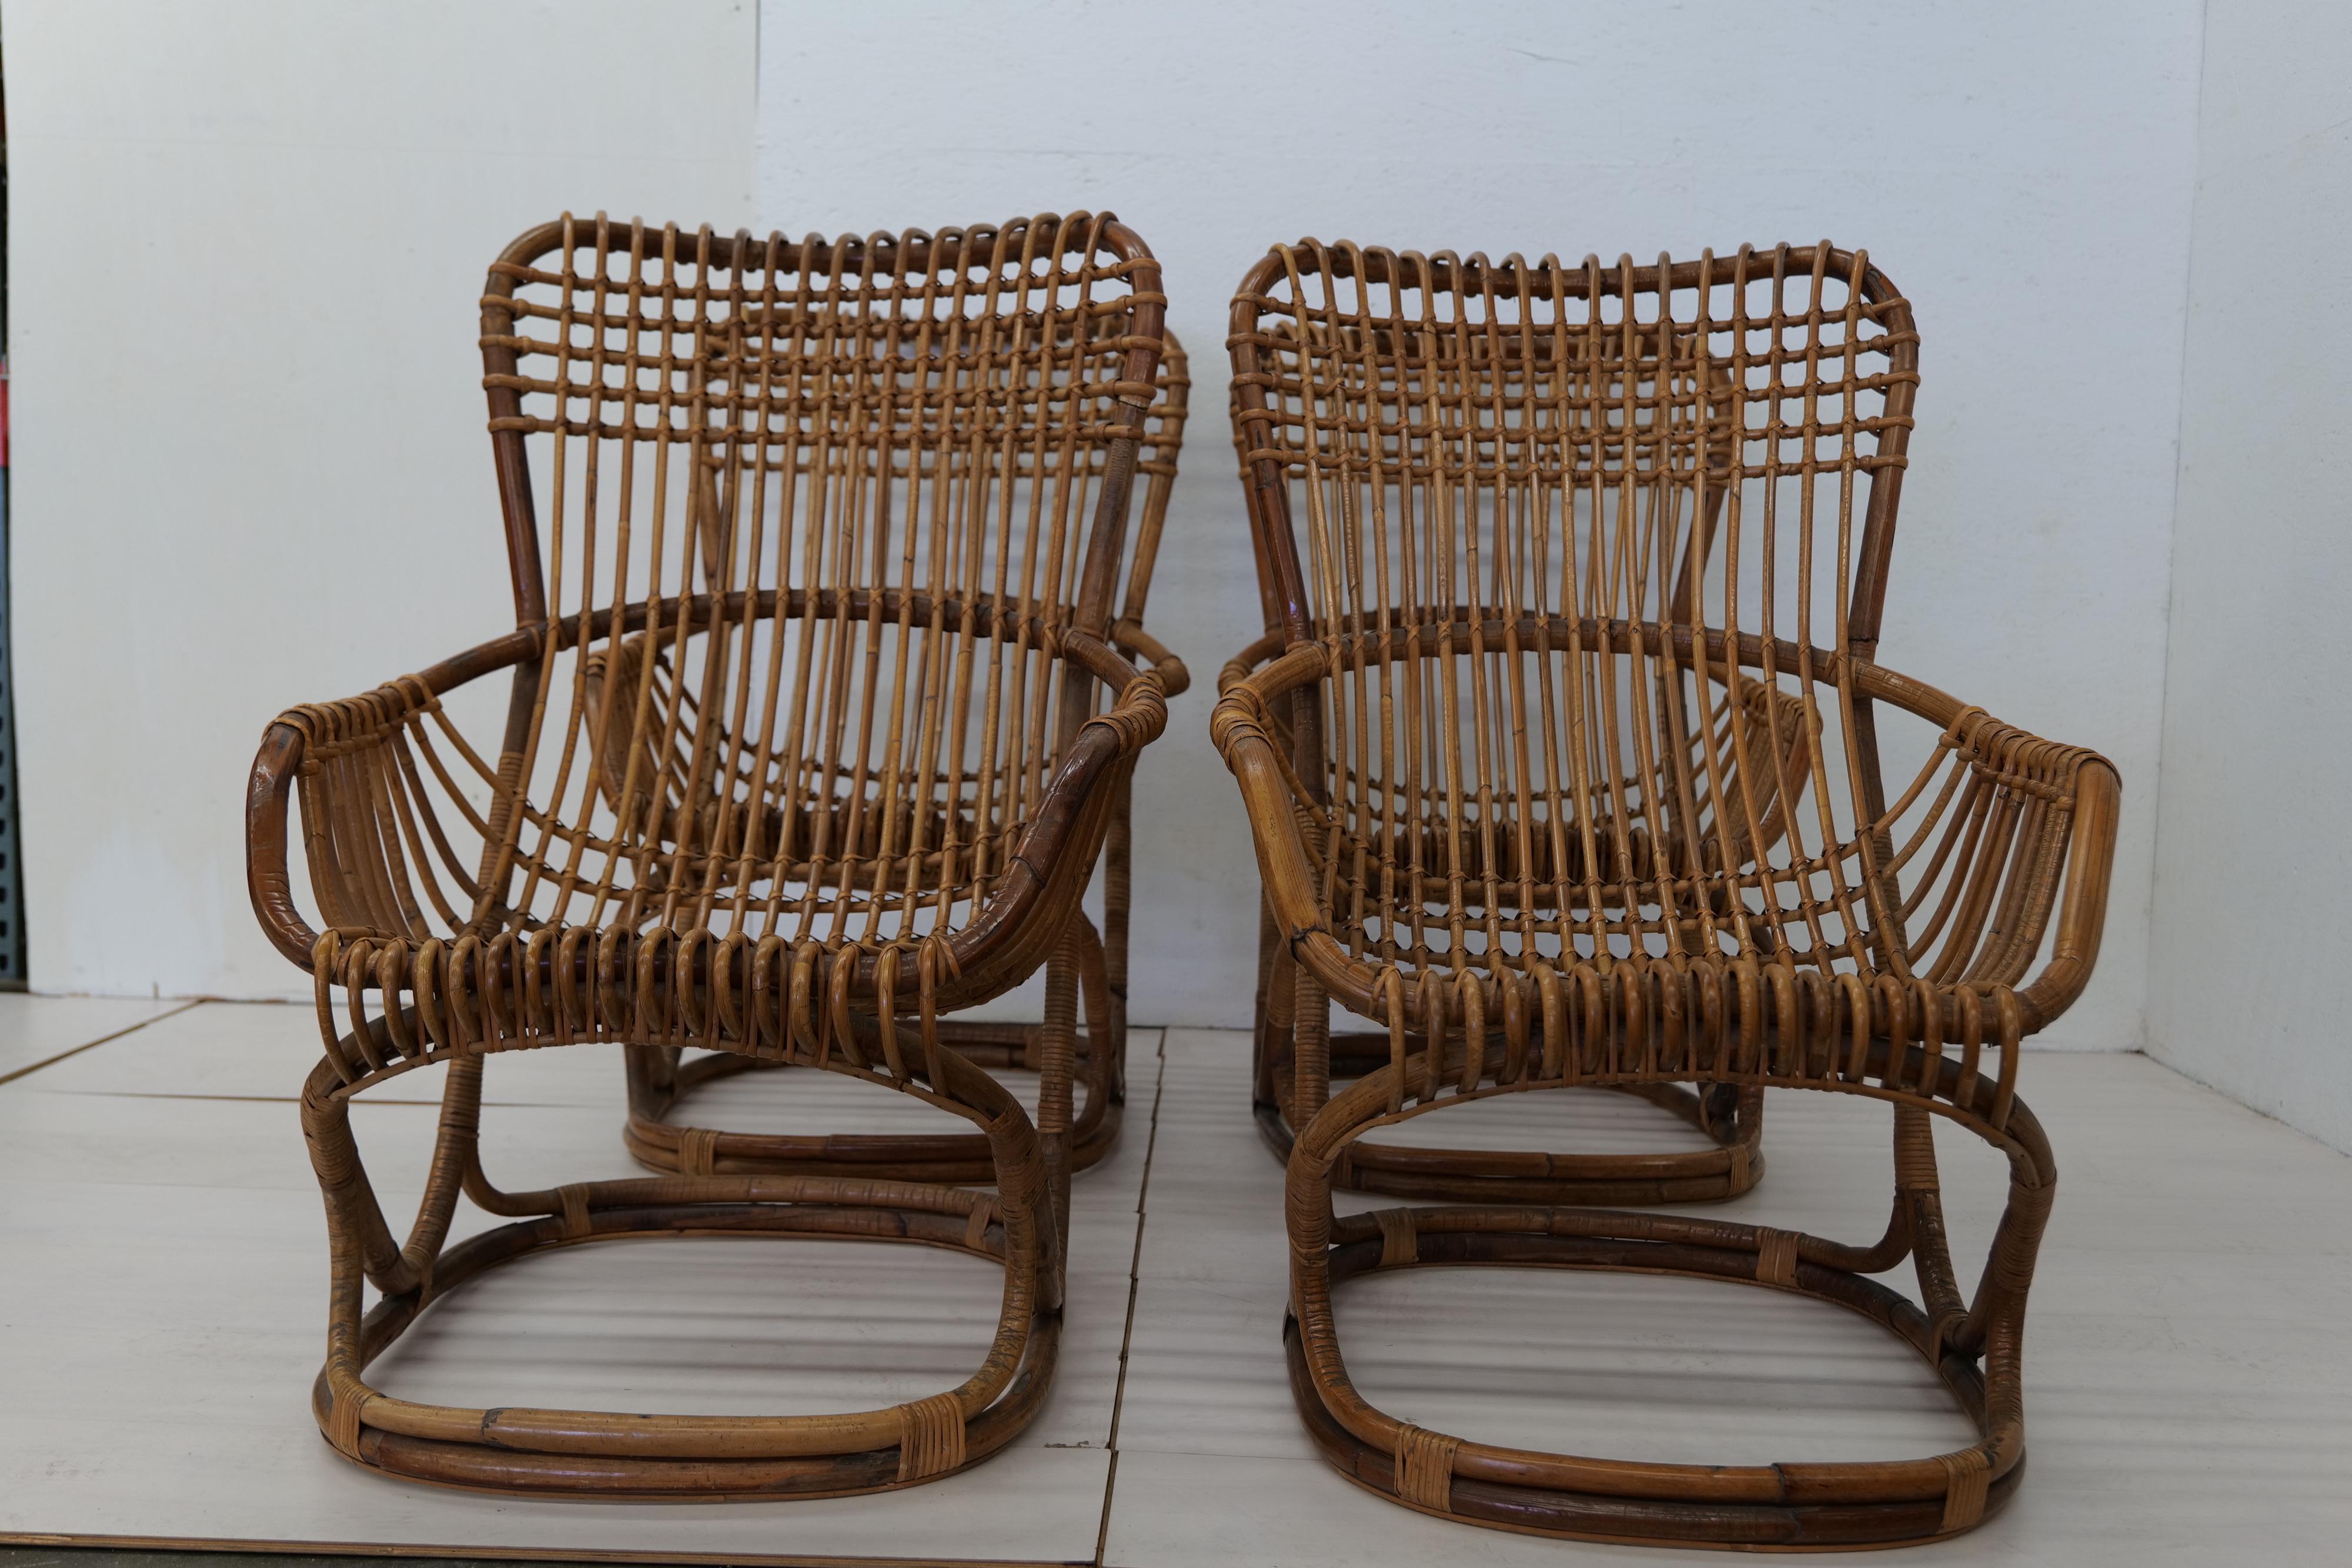 Found in Italy, this rattan armchairs was designed by Tito Agnoli in 1950. Curvy and comfortable, this single chair can be used with or without a cushion. 

